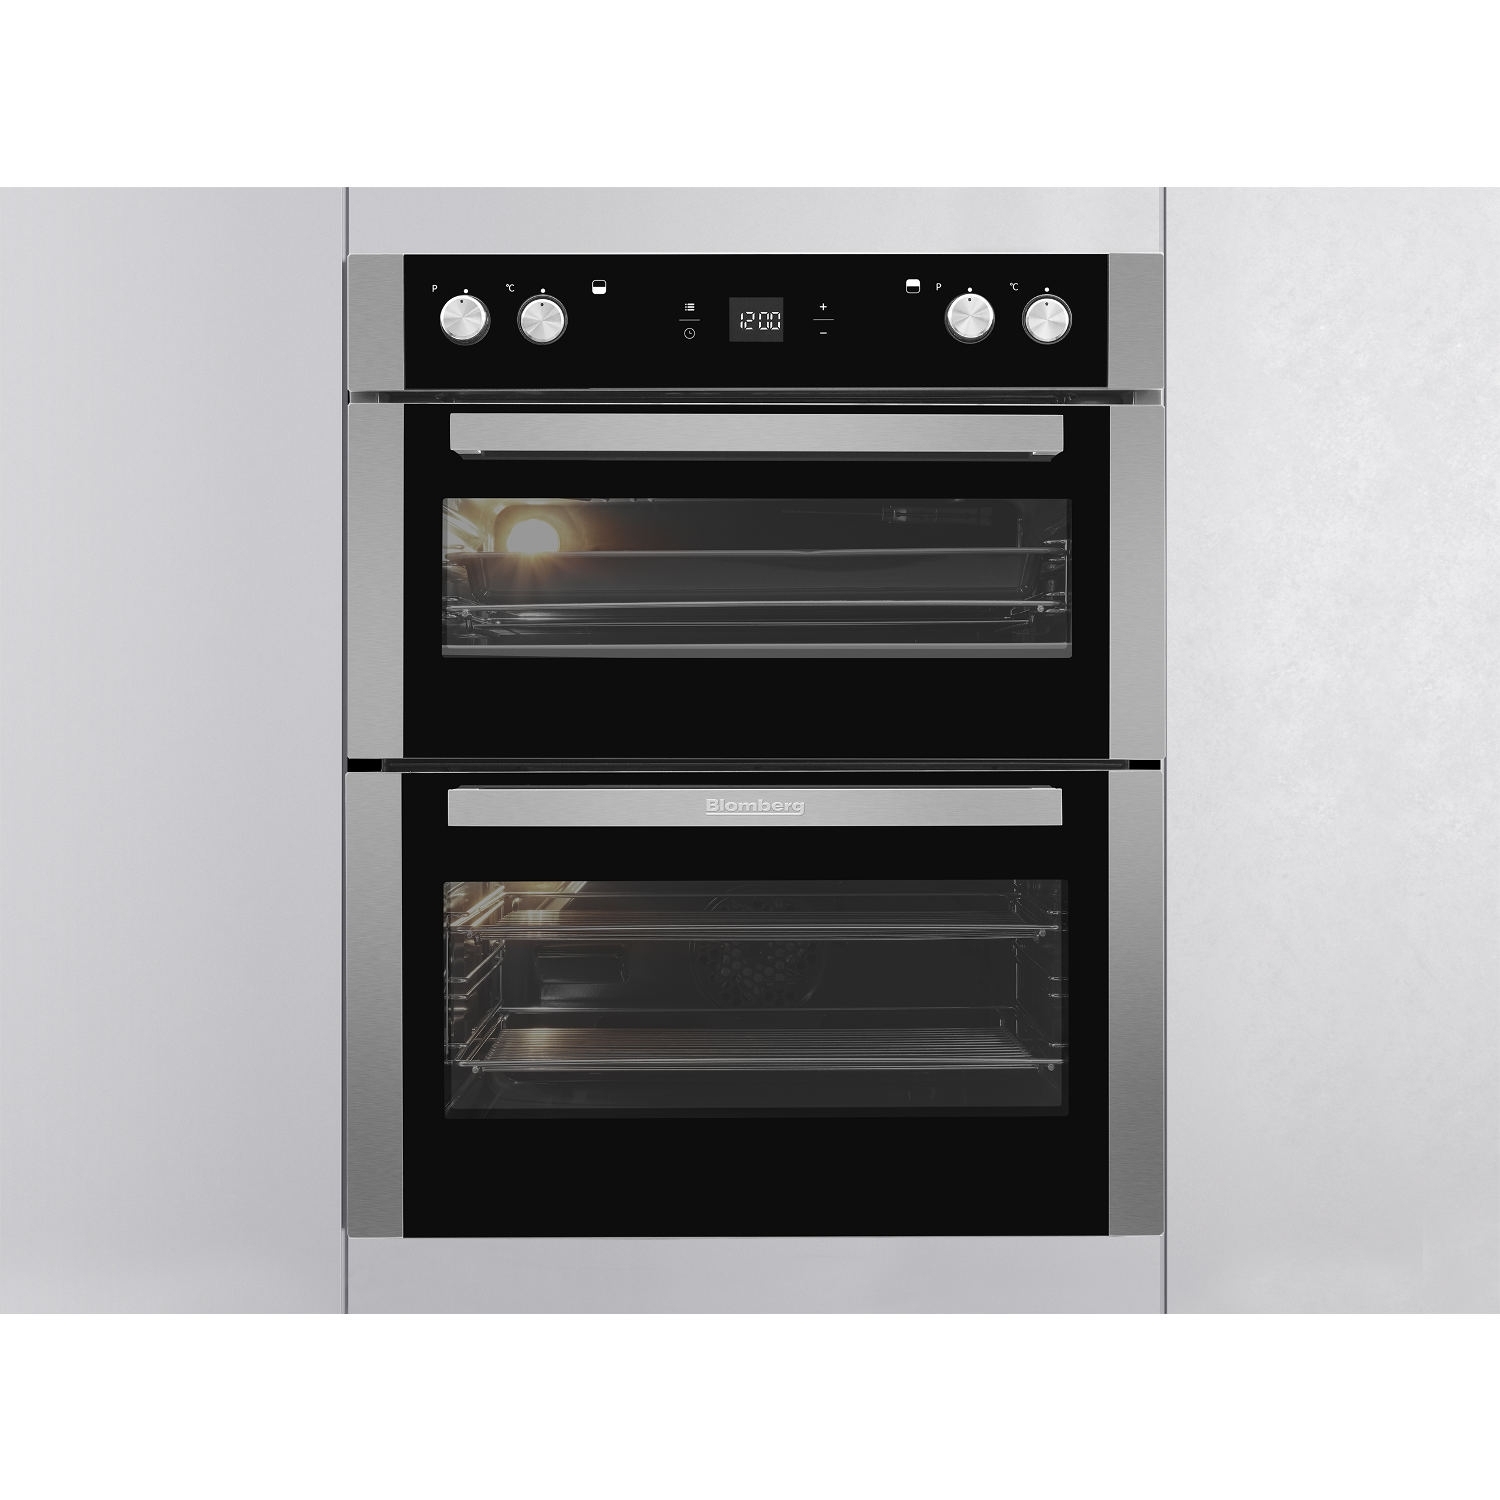 Blomberg OTN9302X Built Under Electric Double Oven - Stainless Steel - 1